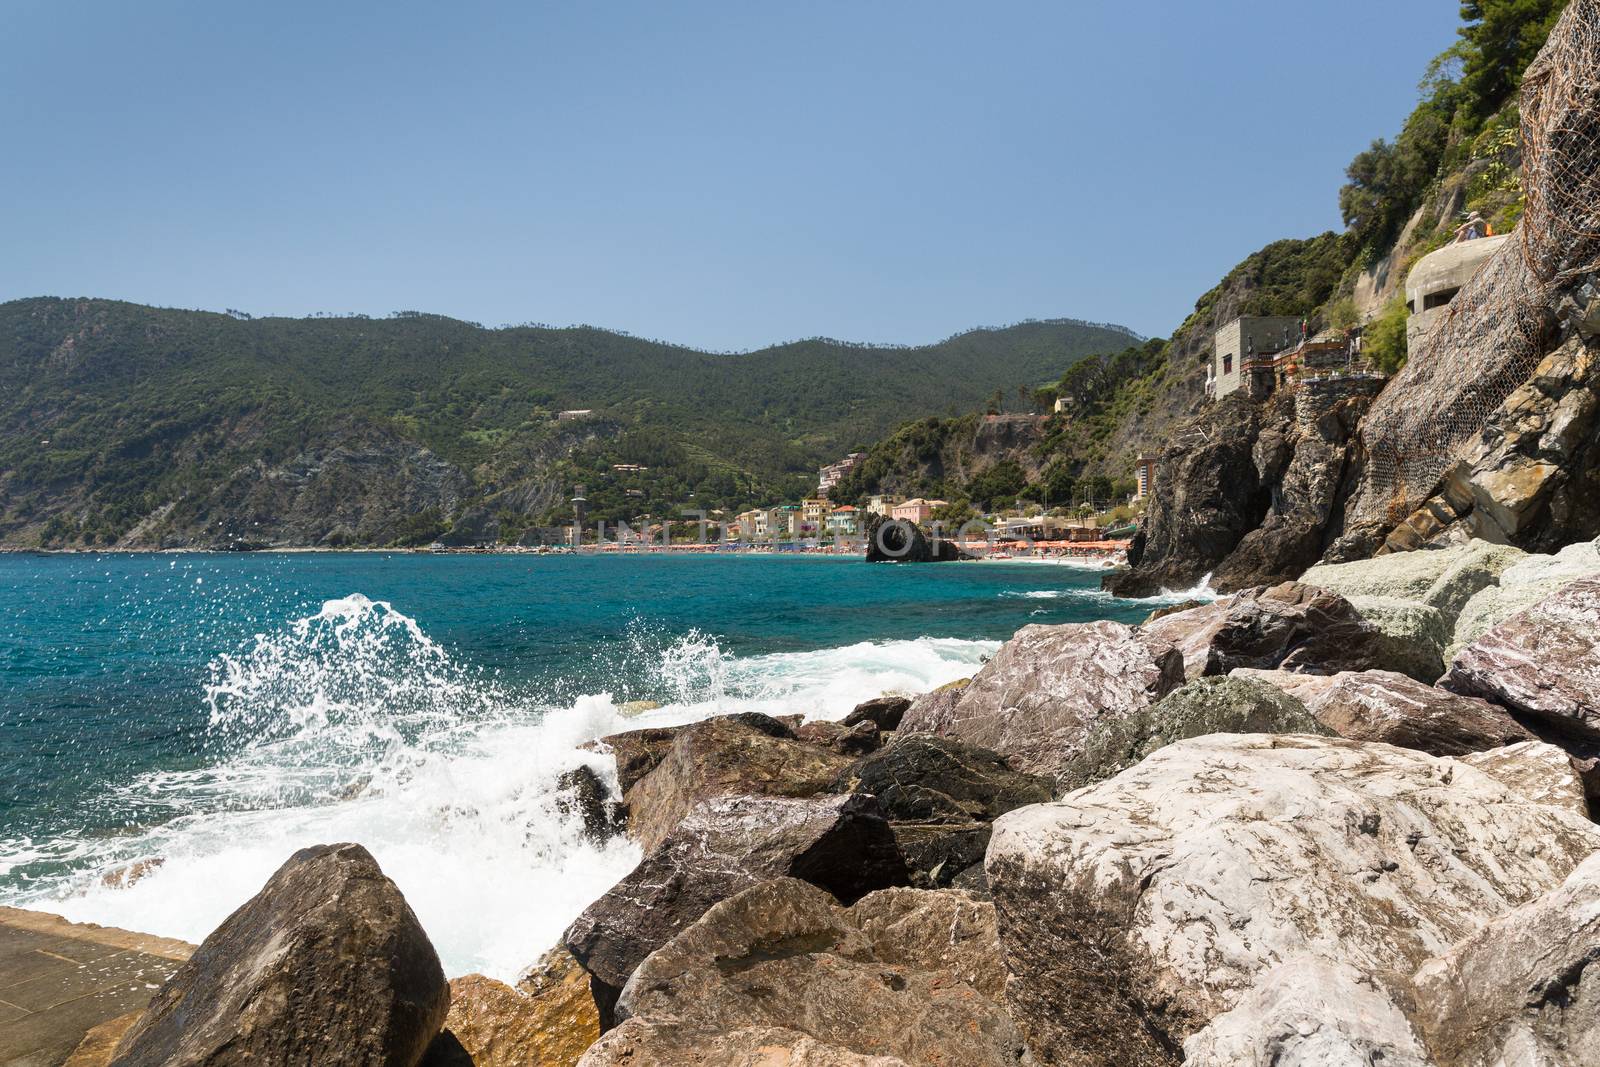 The town of Monterosso of the Cinque Terre by chrisukphoto